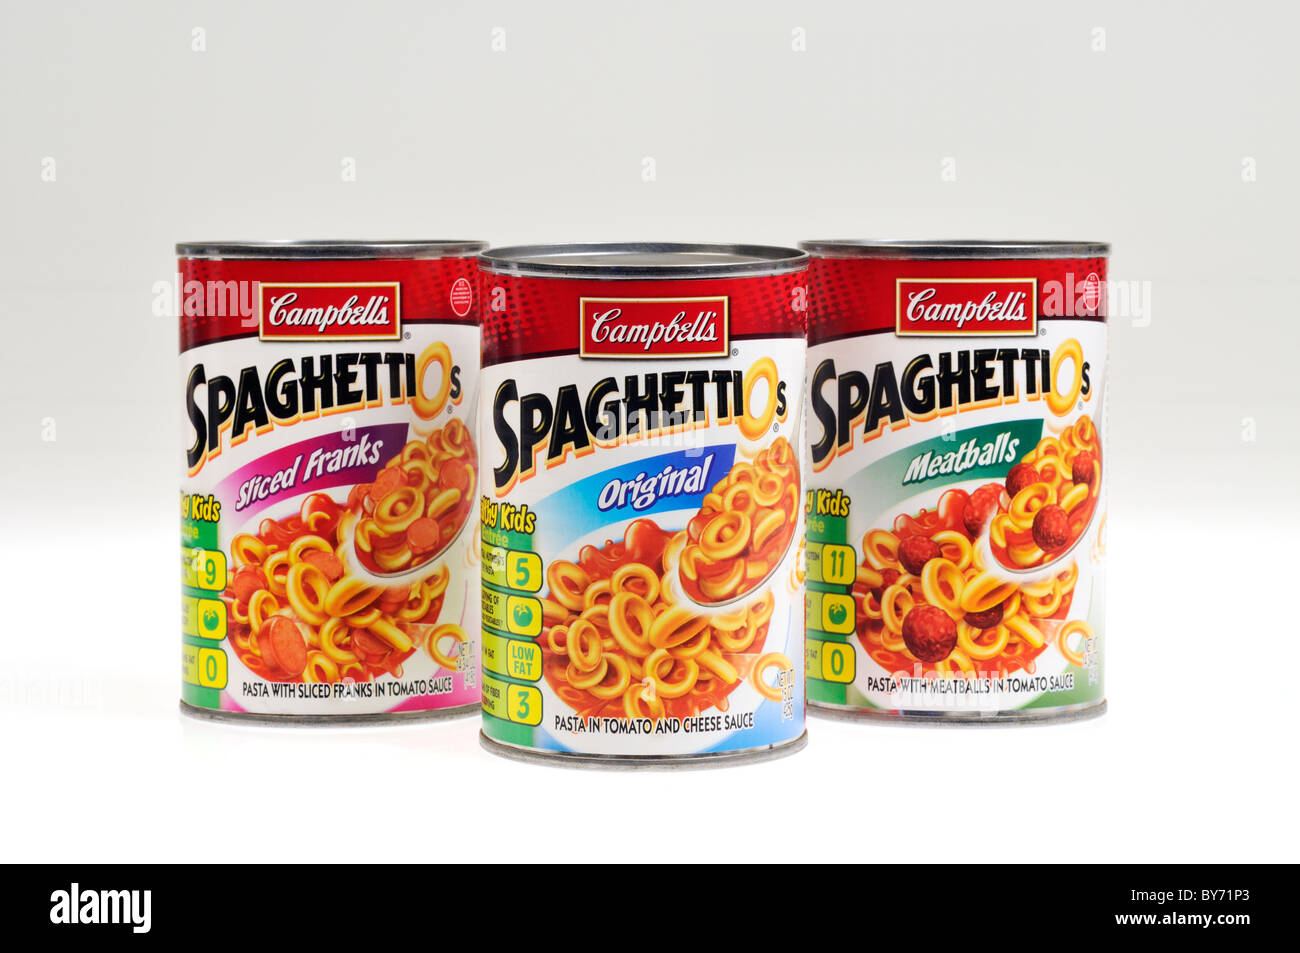 Variety of cans or tins of Campbells Spaghetti-O's with meatballs, sliced franks and original on white background, cut out. Stock Photo